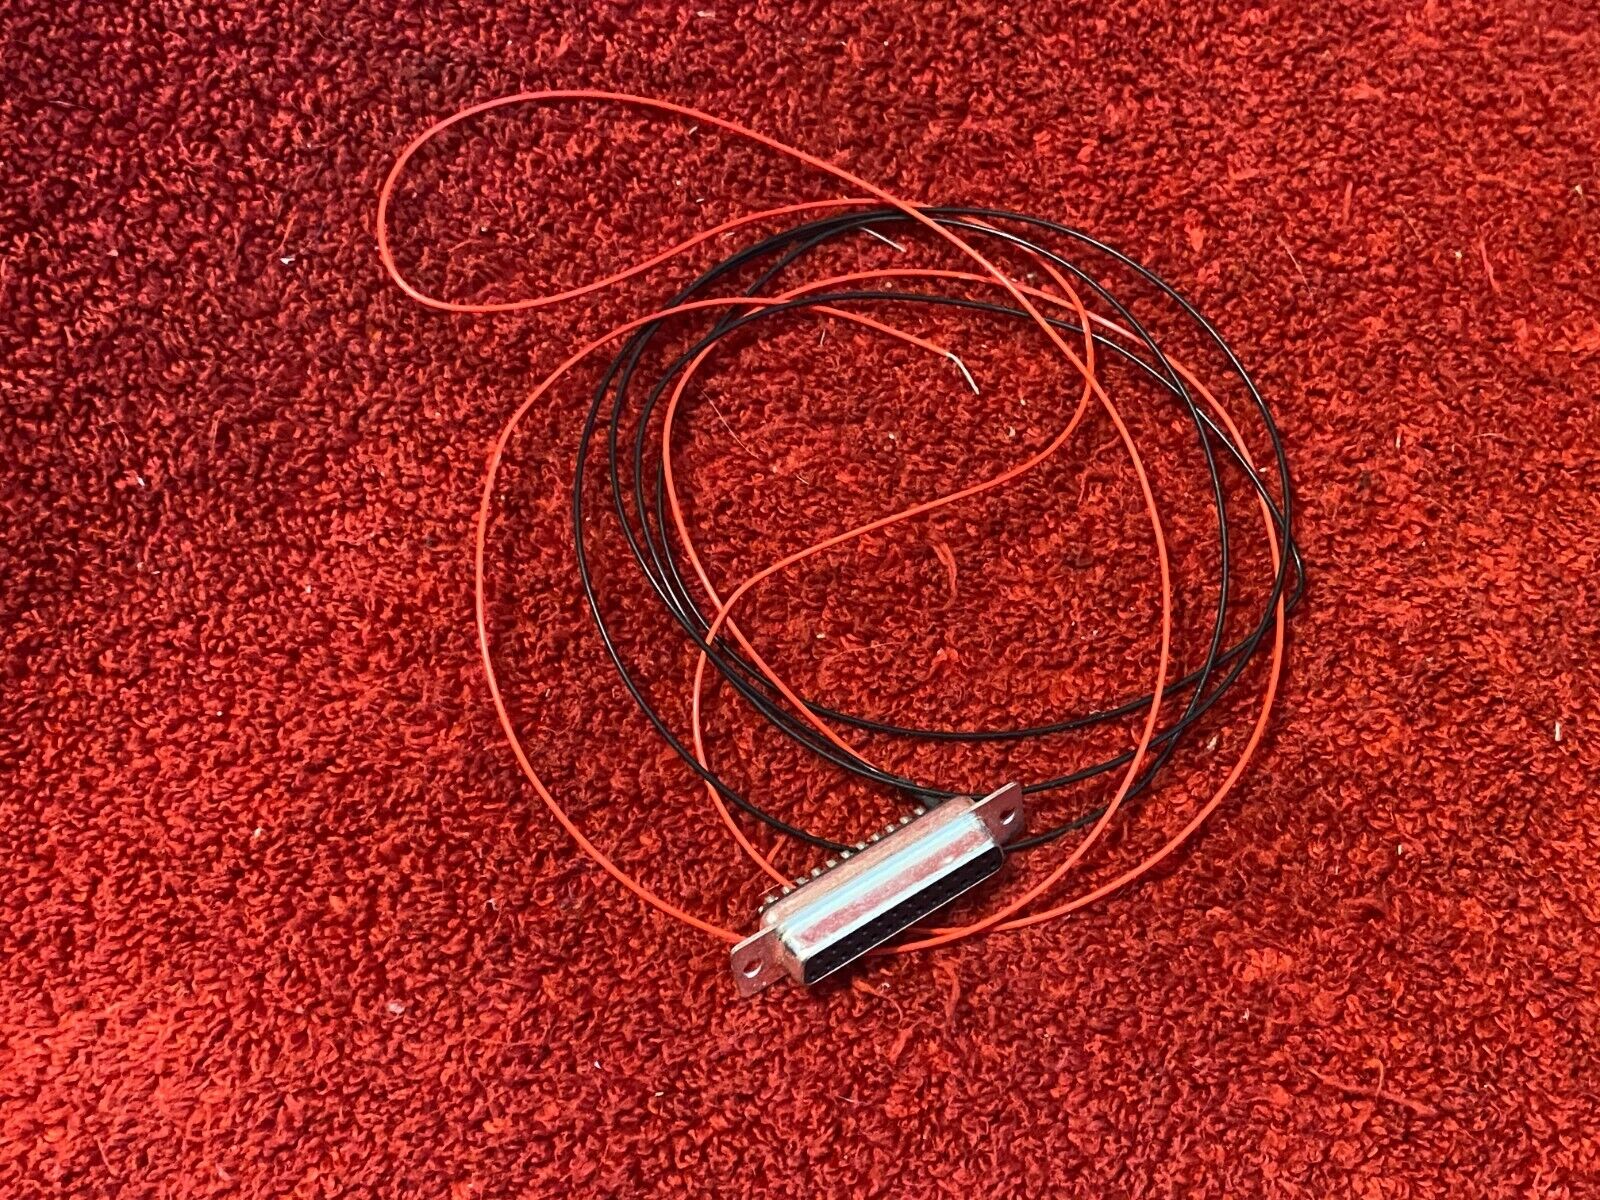 GARMIN GPSMAP 360 CONNECTOR AND WIRE